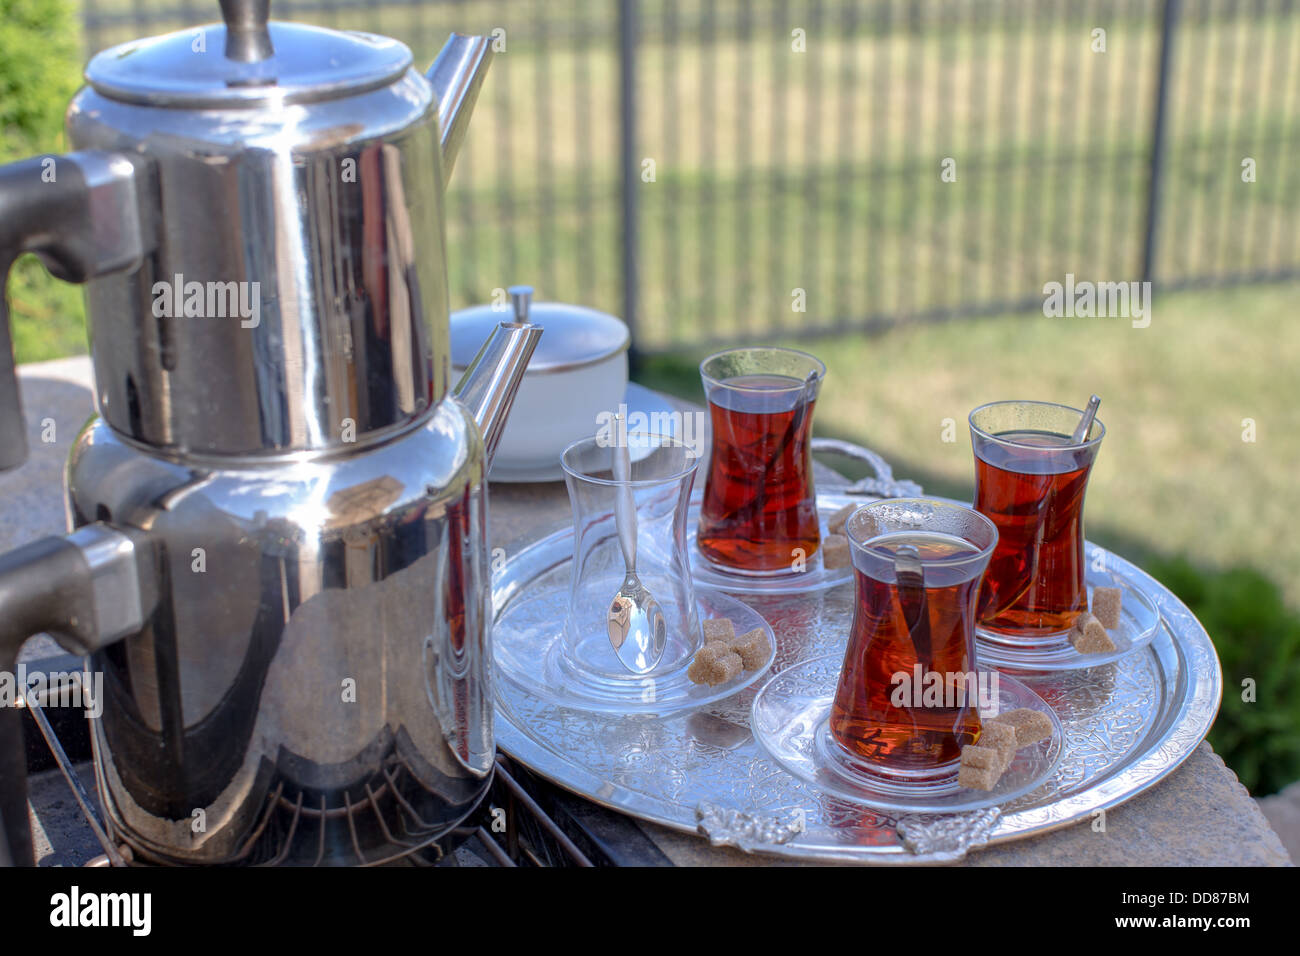 Traditional strong black Turkish tea served with contemporary kettle and glasses along with brown sugar Stock Photo